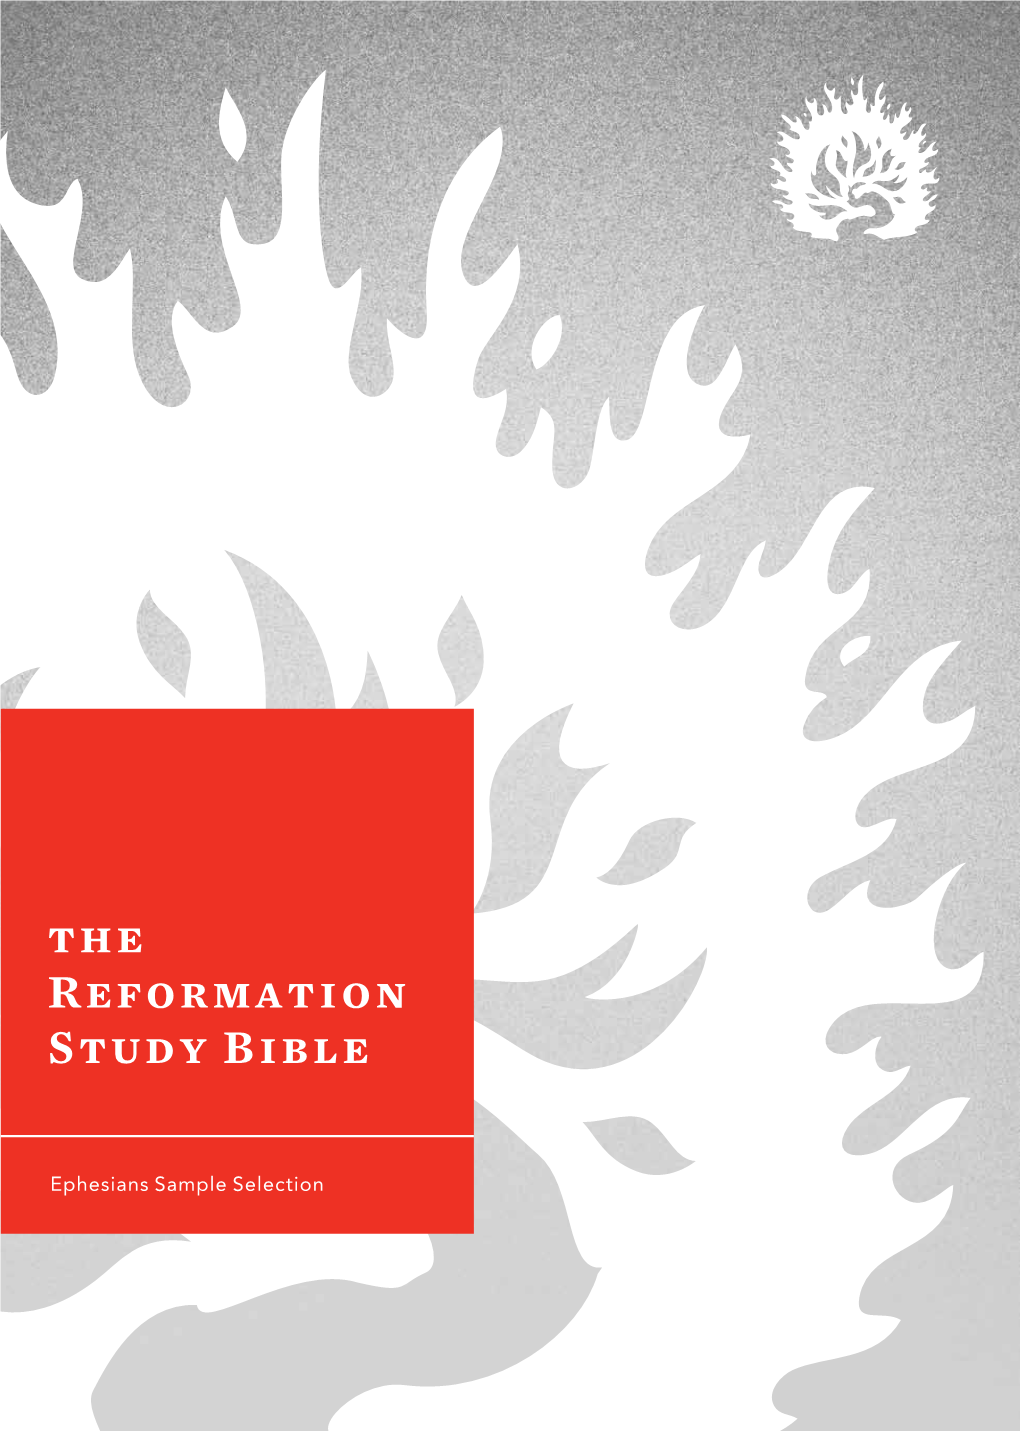 The Reformation Study Bible